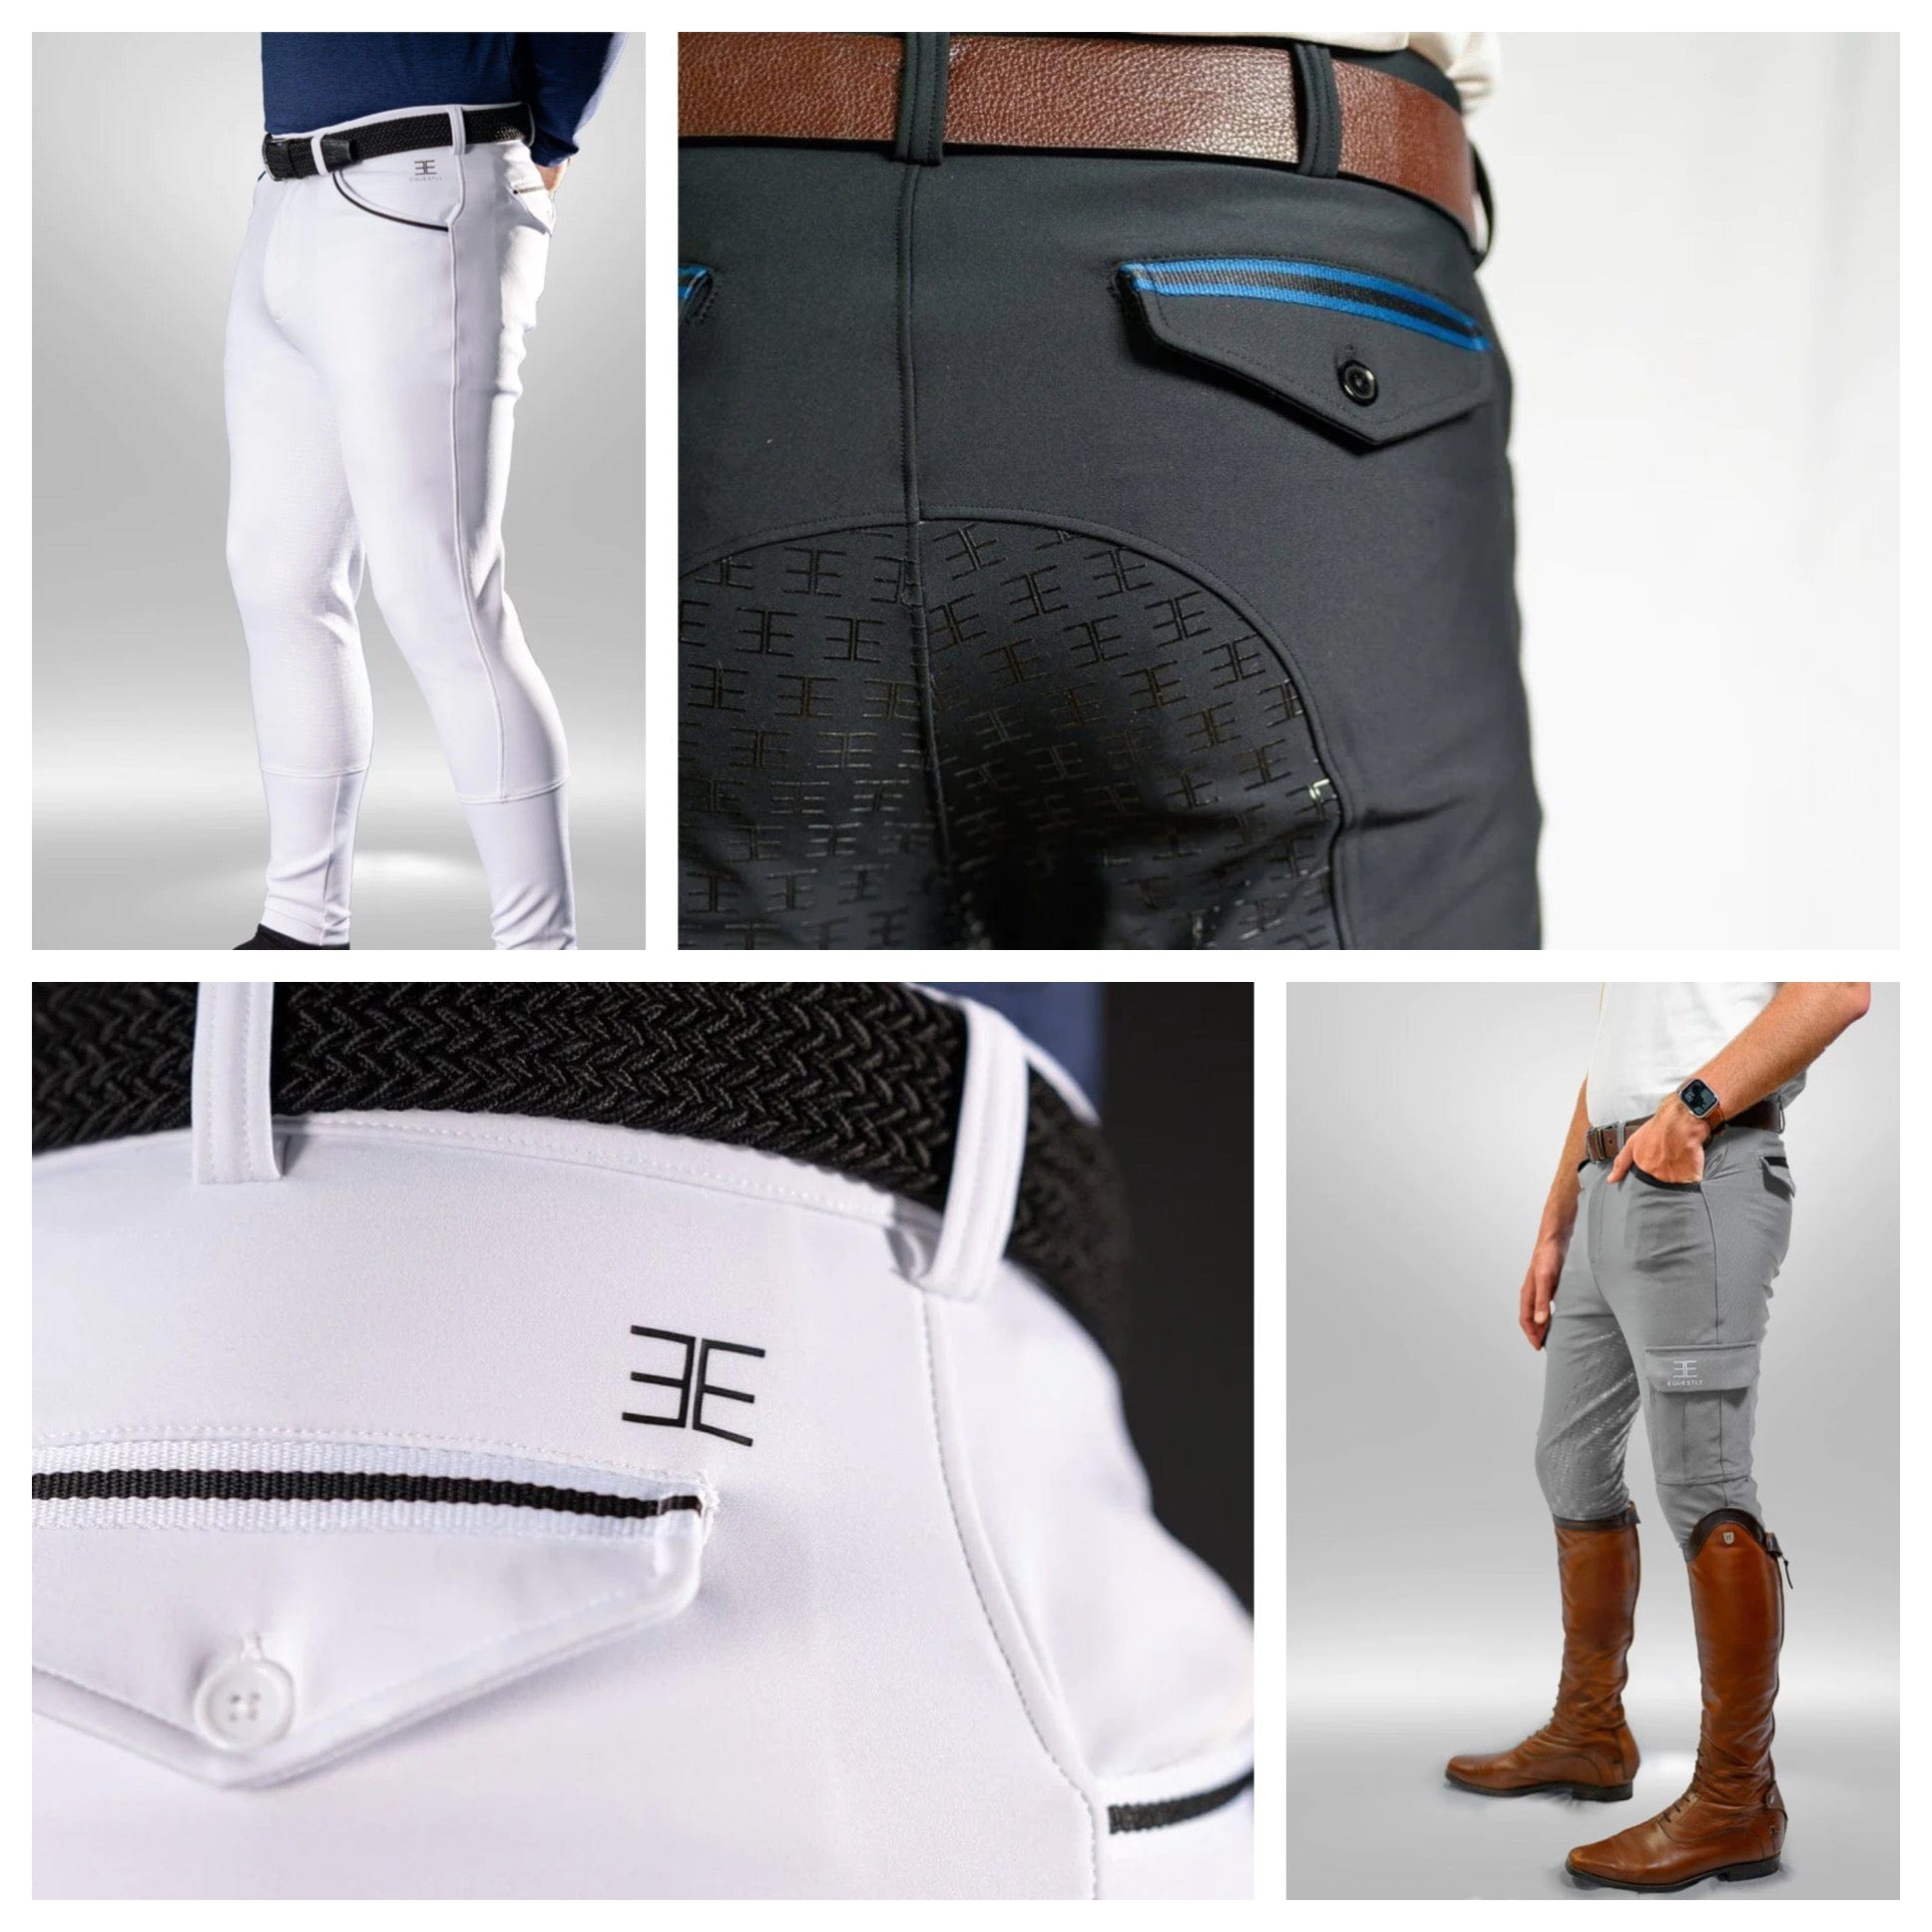 Equestly Men's Breeches Equestly- Lux GripTEQ Mens Breeches equestrian team apparel online tack store mobile tack store custom farm apparel custom show stable clothing equestrian lifestyle horse show clothing riding clothes horses equestrian tack store